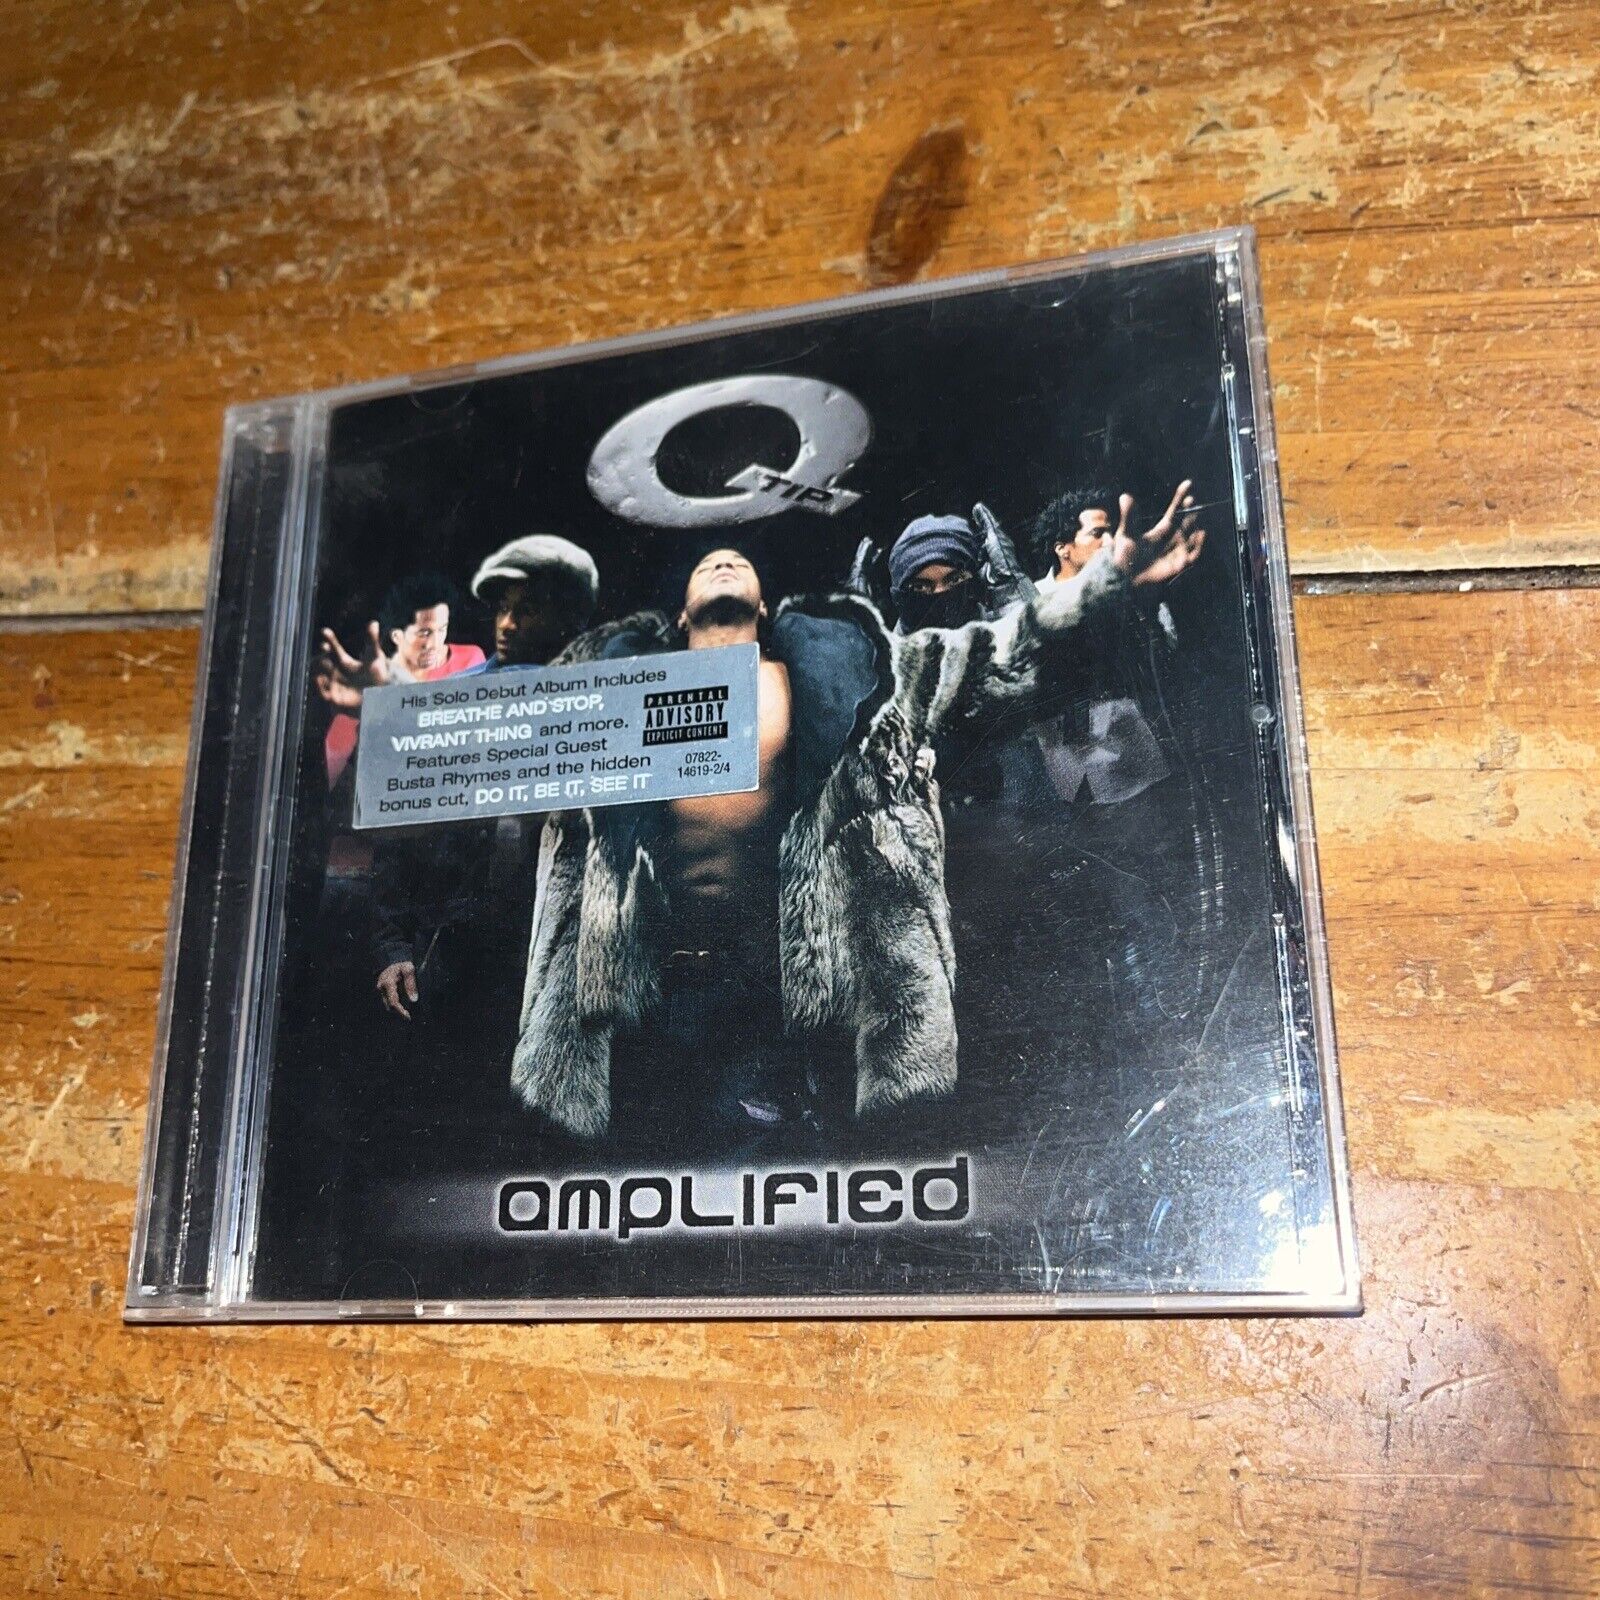 Q-Tip : Amplified CD (1999)